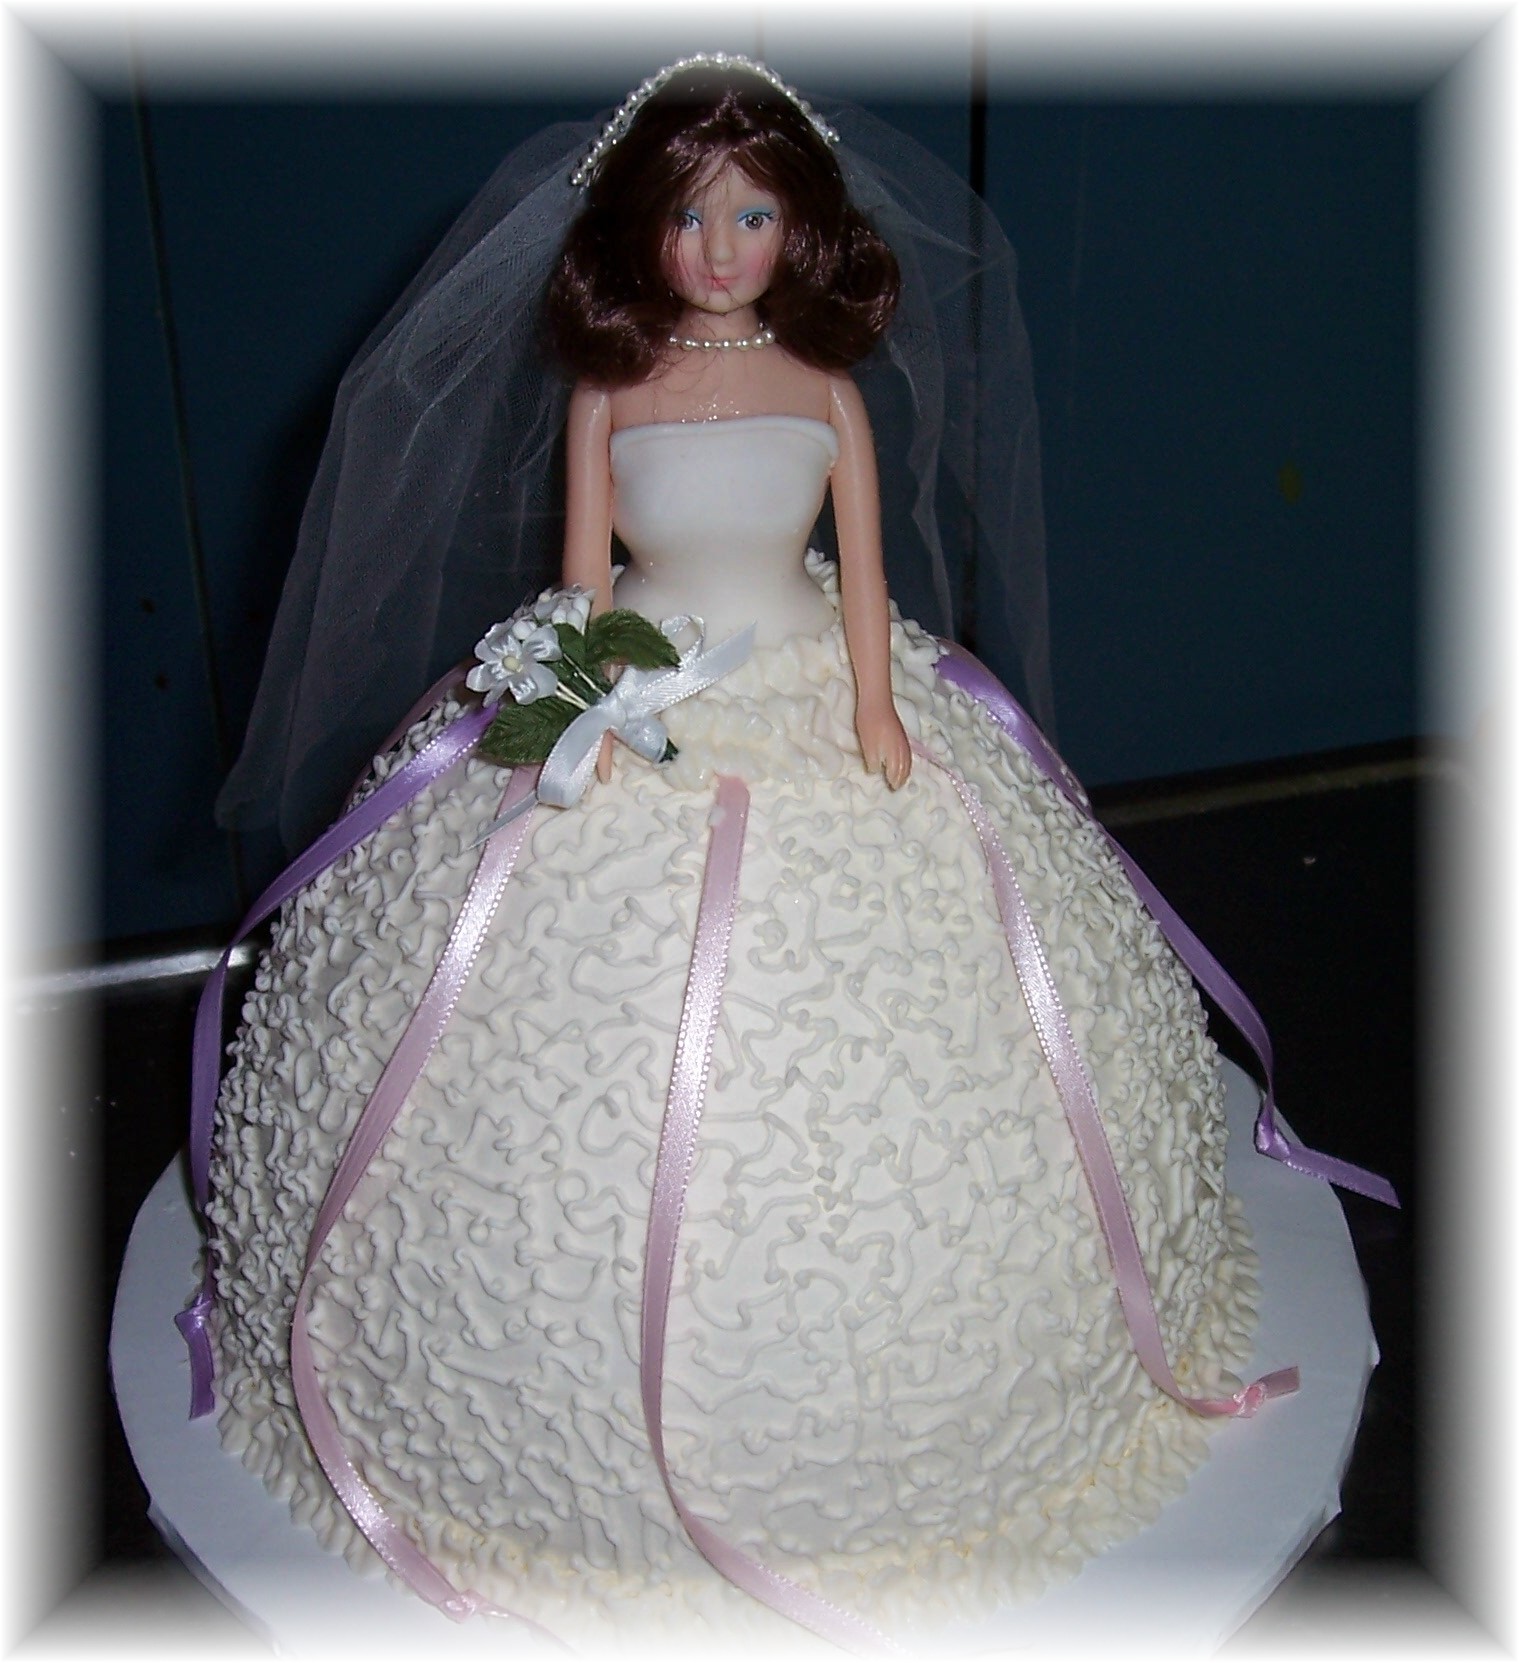 Barbie Doll Cakes for the Bride to Be 